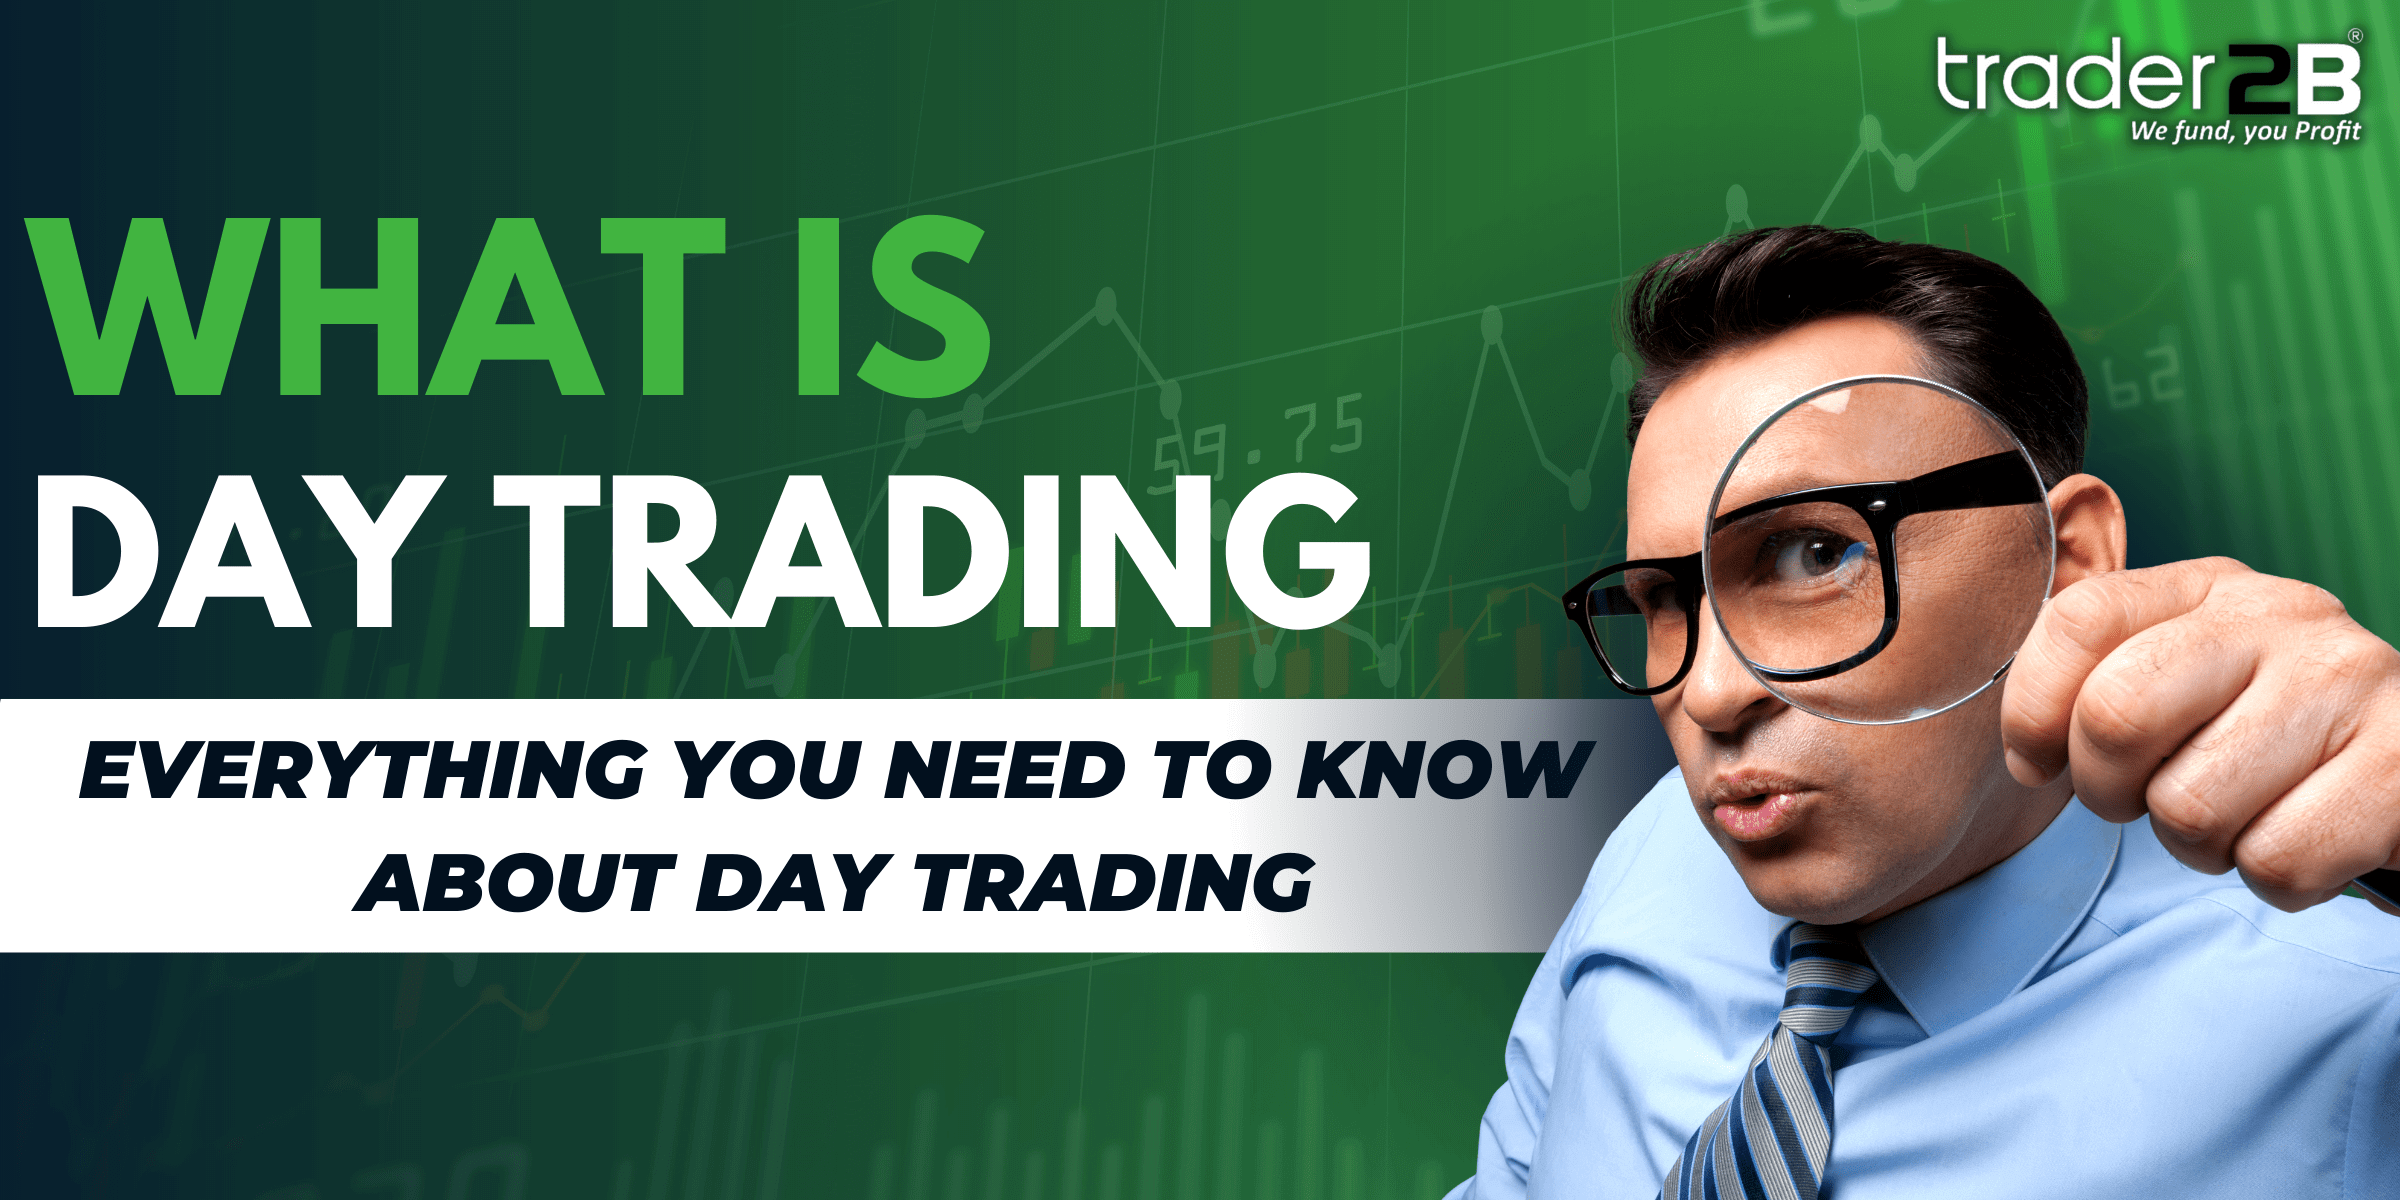 What is Day Trading? Learn more about Day Trading Definition & it's basics